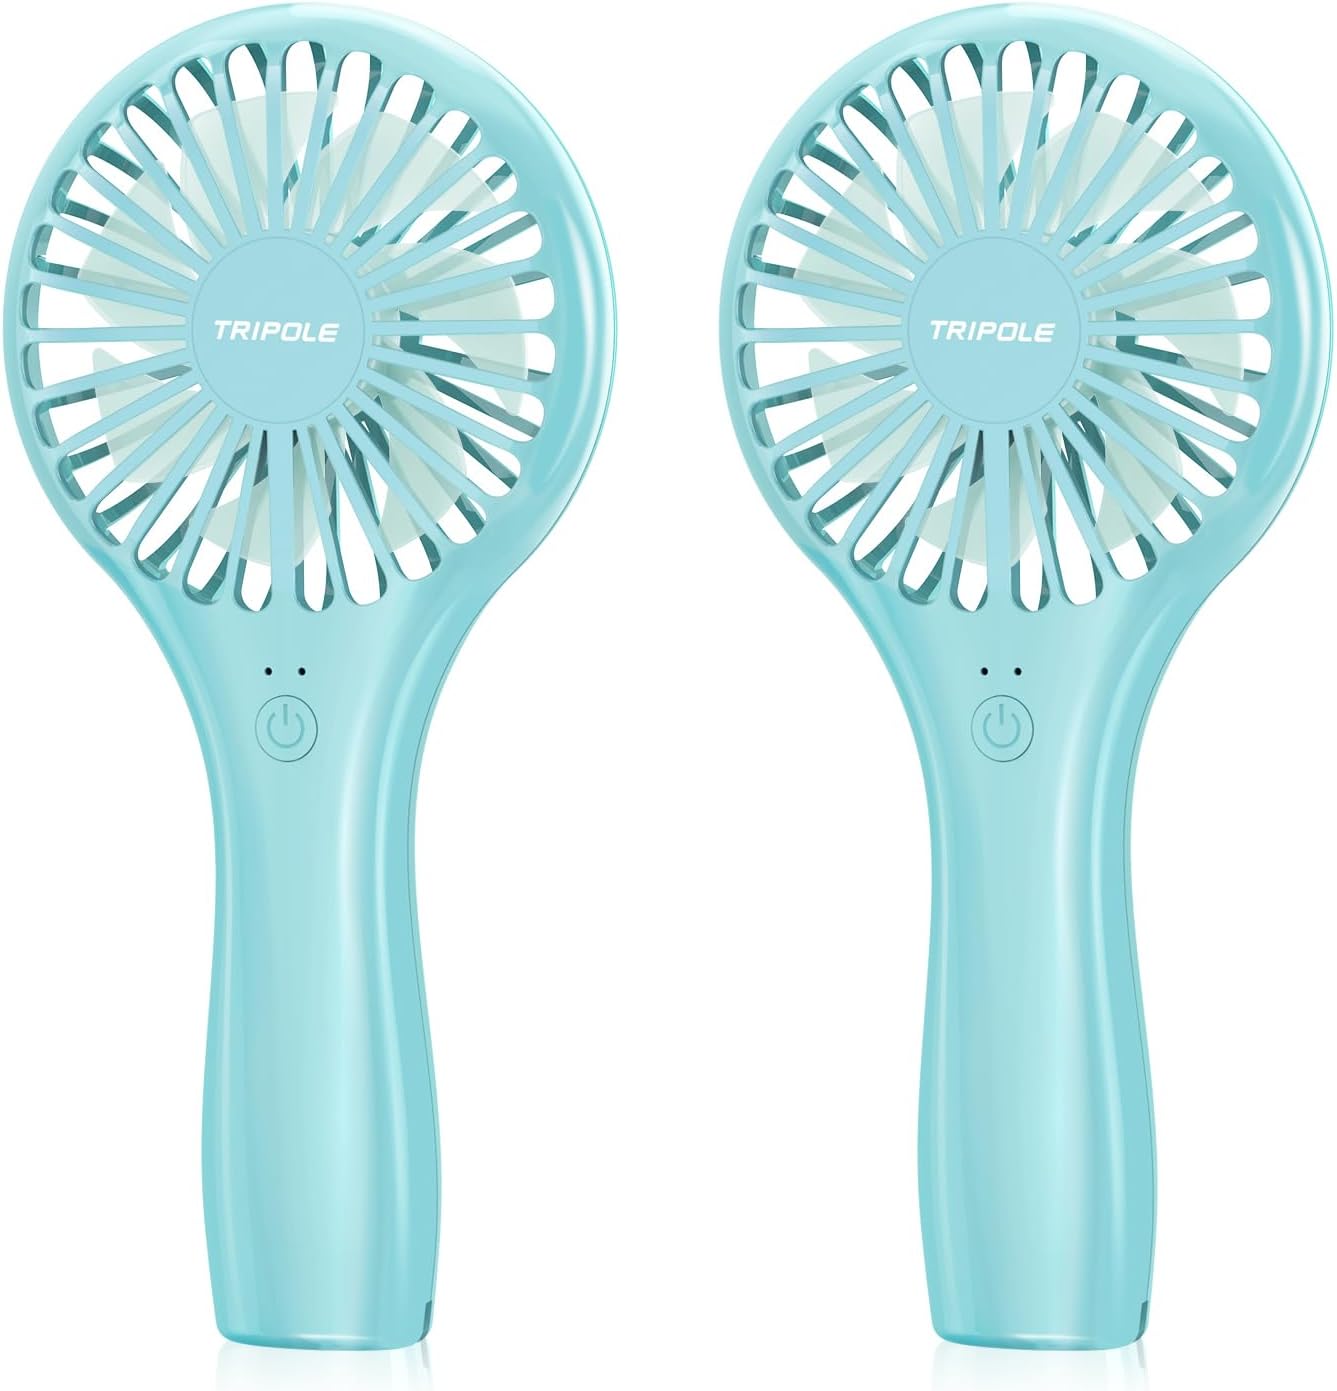 TriPole 2 Pack Handheld Fans Blue Mini Portable Fans, Rechargeable Battery Operated Small Fan for Outdoor Travel Kids Trip, Cute Design Powerful Personal Lash Fan for Makeup Eyelash Extensions